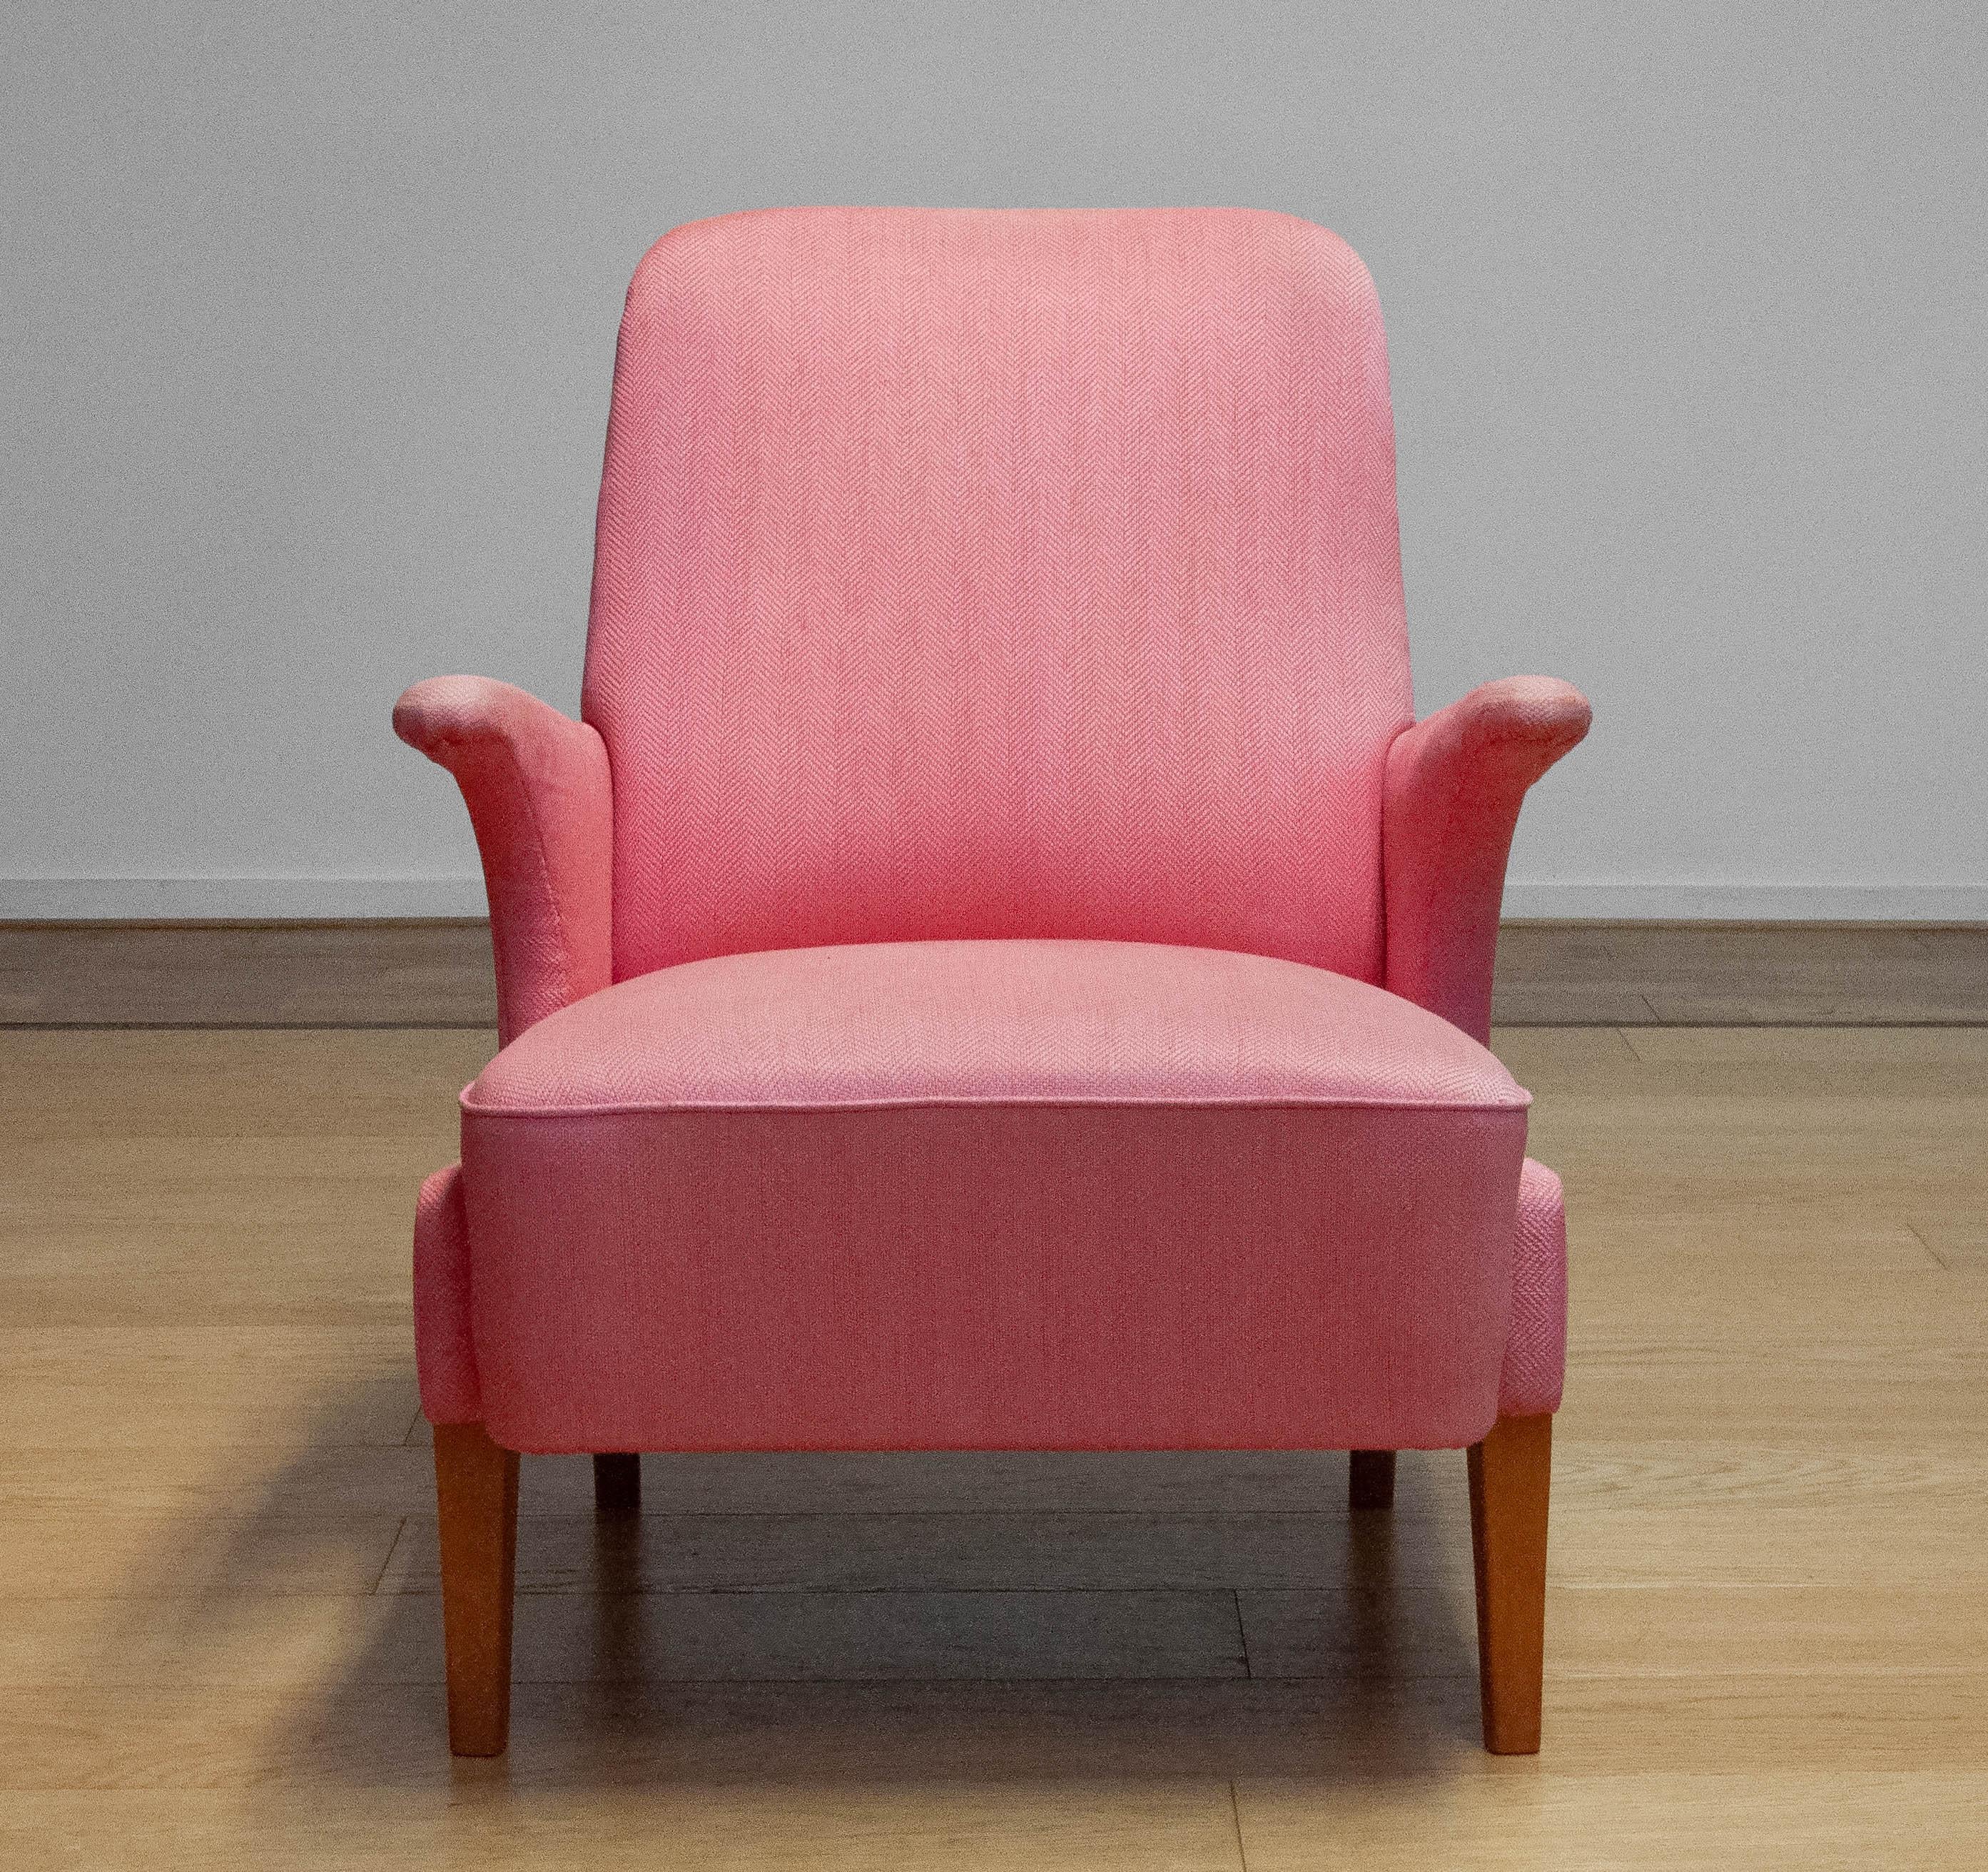 1950 Armchair / Lounge Chair With Powder Pink Wool Upholstery By Dux From Sweden For Sale 3